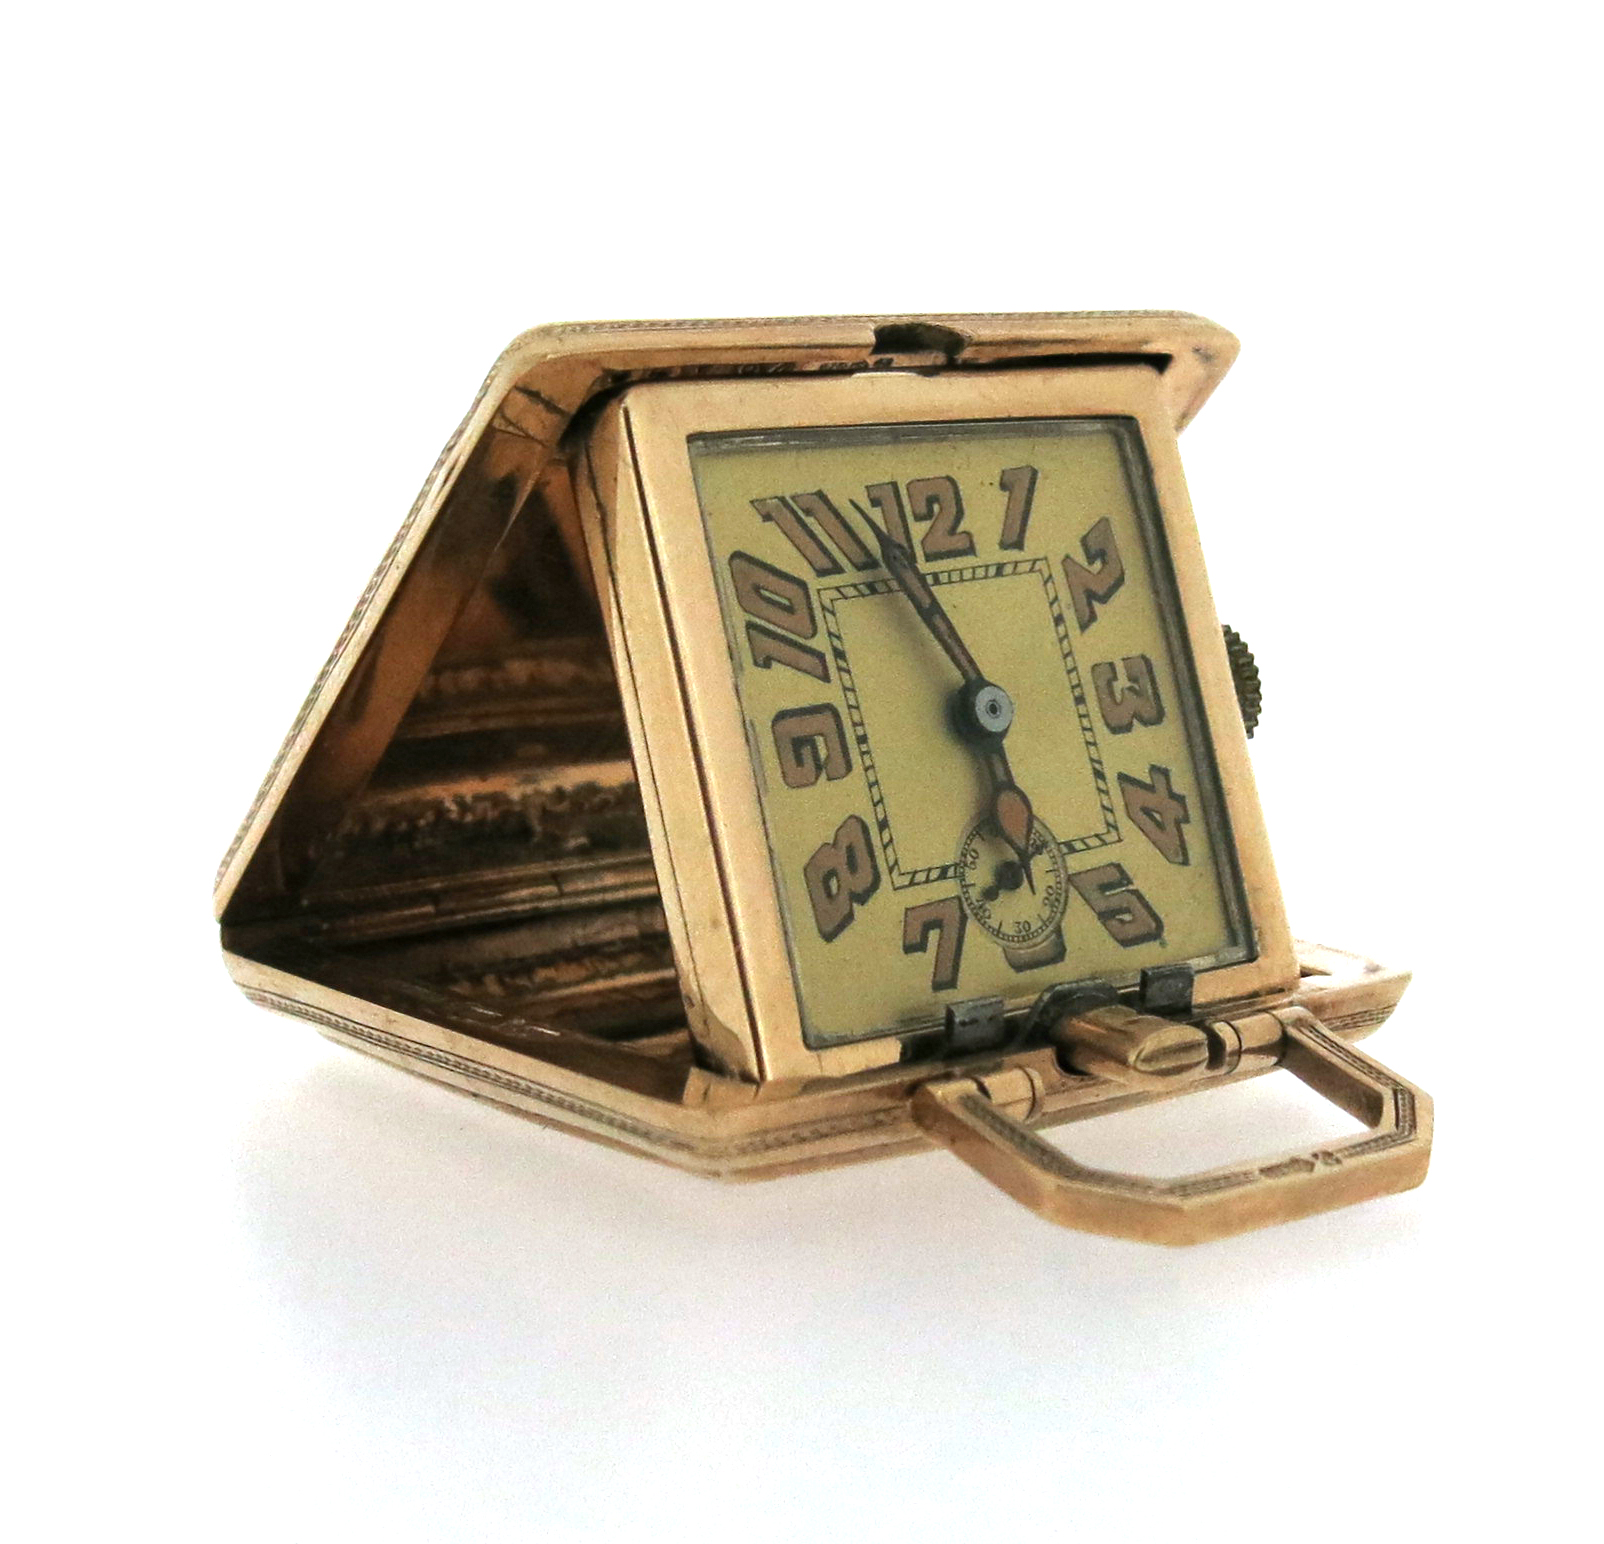 A 9ct gold travel clock, the square-shaped case with engraved decoration opens to reveal a square-